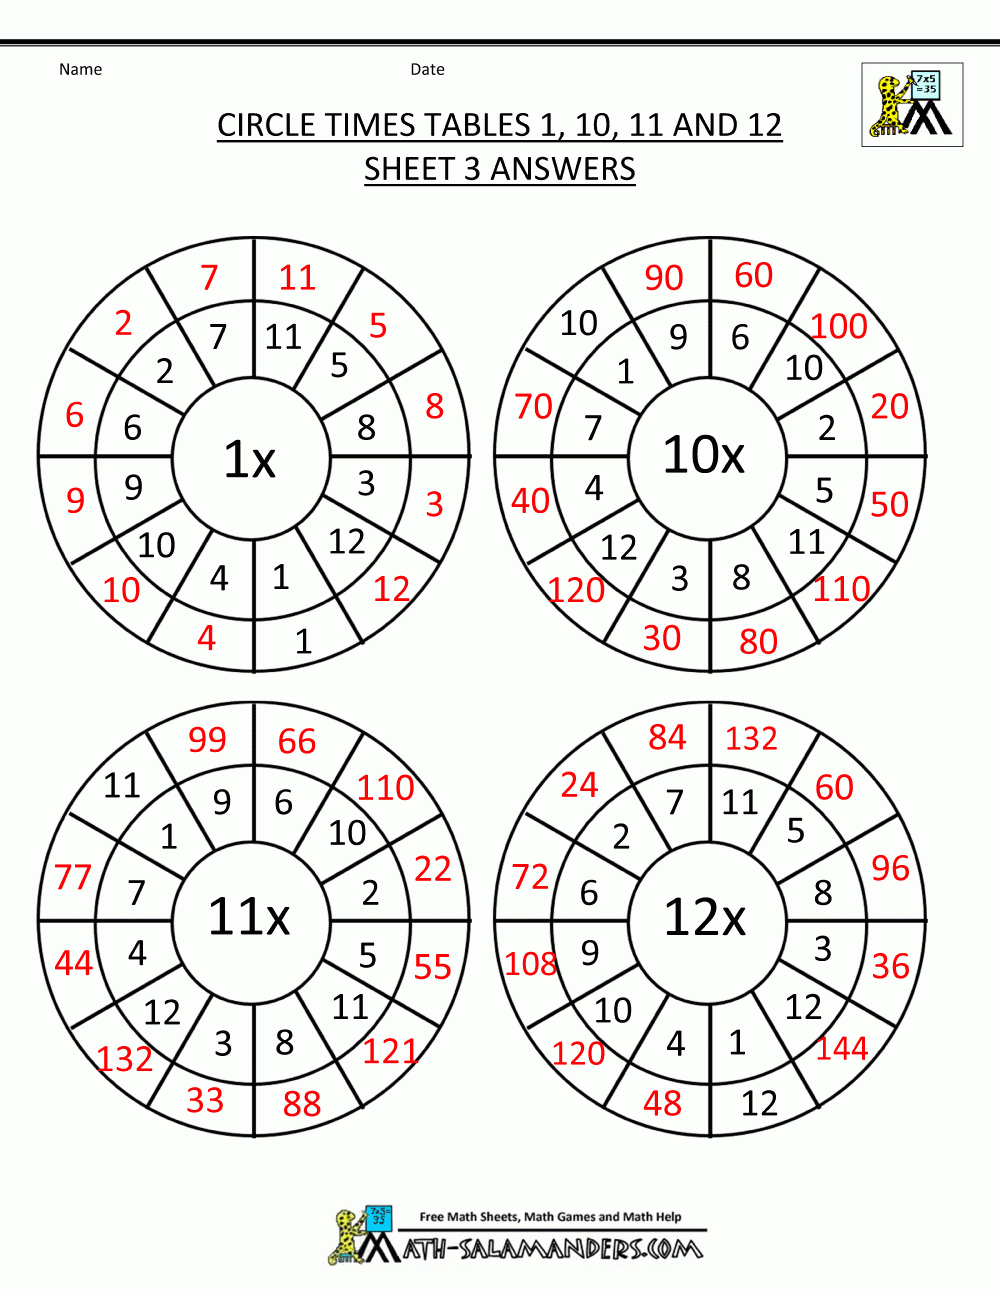 Times Table Worksheet Circles 1 To 12 Times Tables As Well As Times Tables Worksheets 1 12 Pdf